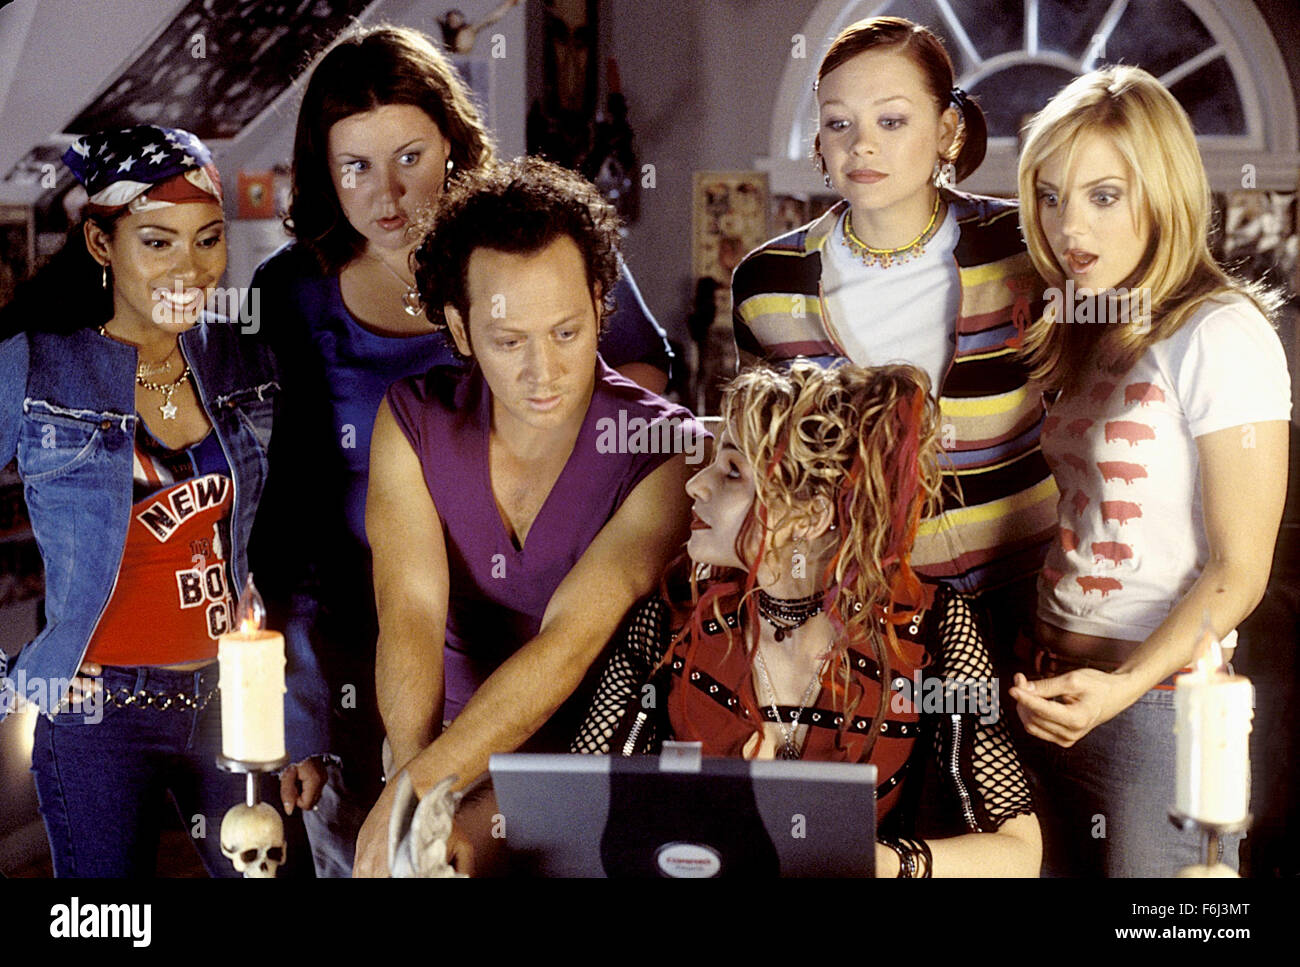 Dec 02, 2002; Hollywood, CA, USA; (from left to right) MARITZA MURRAY as Keecia 'Ling-Ling' Jackson, MEGAN KUHLMAN as Marge Hildenburg, ROB SCHNEIDER as Clive Maxtone, SAM DOUMIT (bottom) as Eden, ALEXANDRA HOLDEN as Lulu, and ANNA FARIS as April Thomas in the comedy ''The Hot Chick'' directed by Tom Brady. Stock Photo